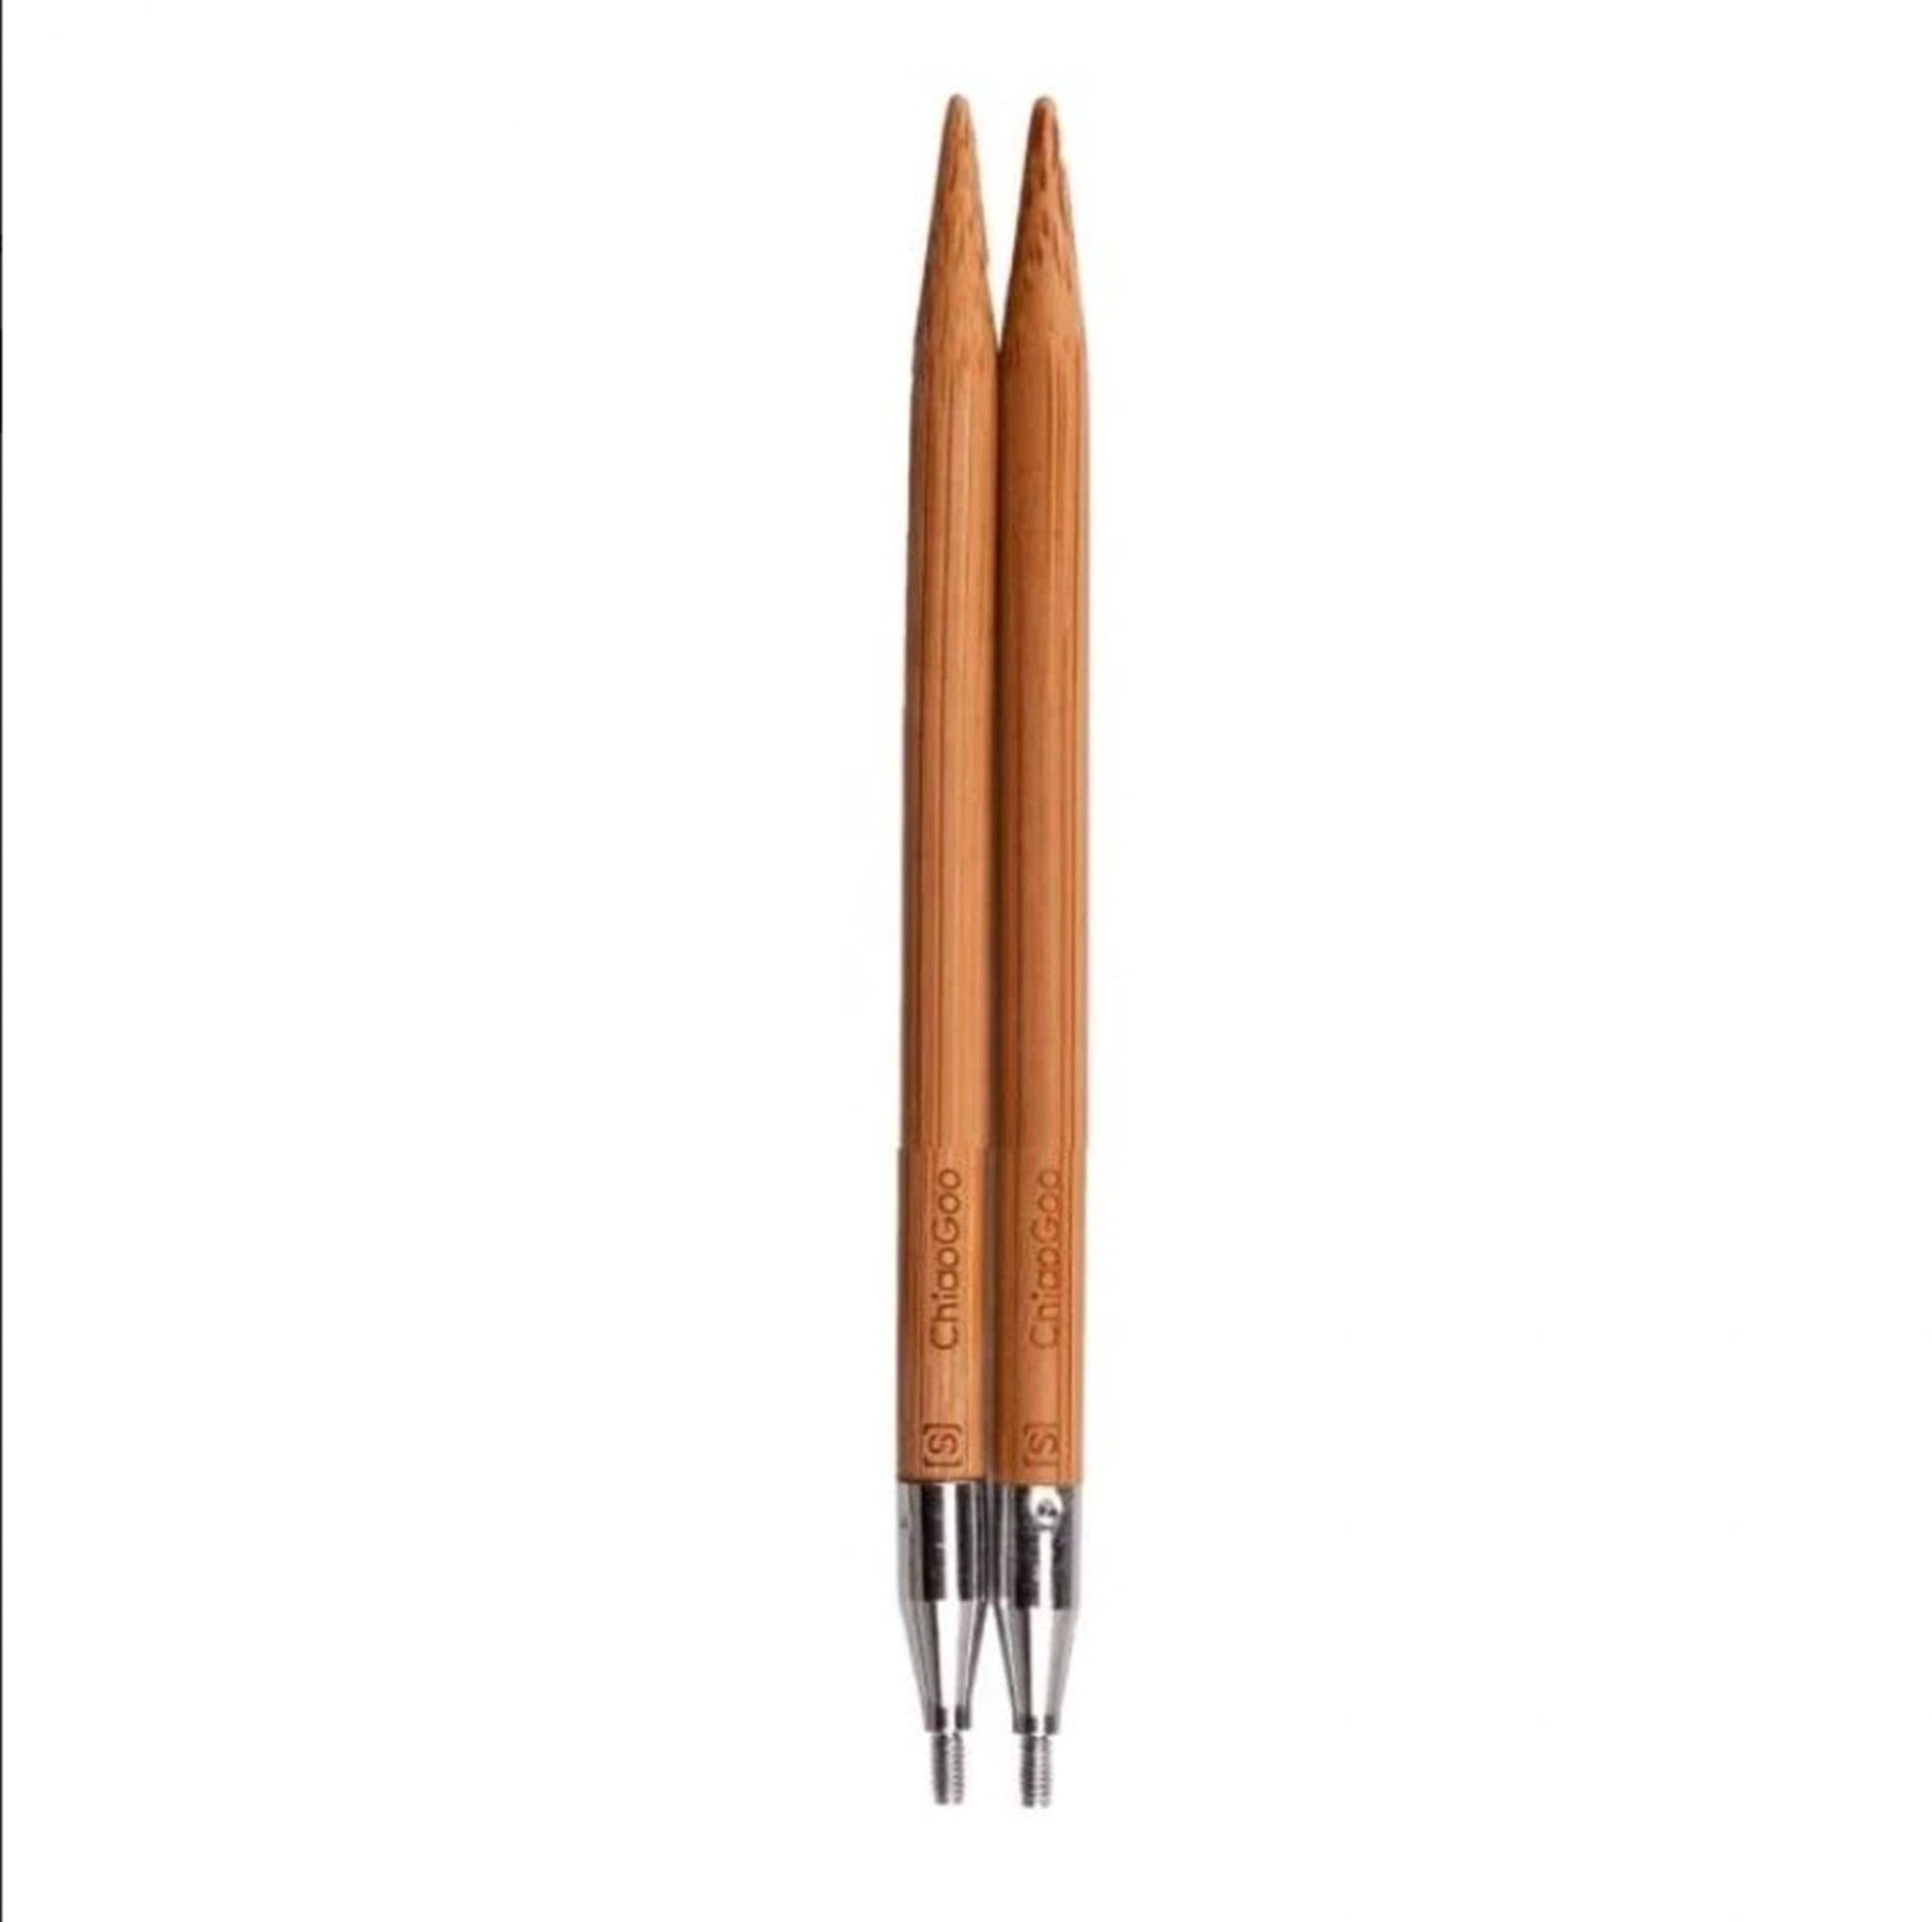 ChiaoGoo SPIN Bamboo Interchangeable Knitting Needle 4 Tip Set, sizes US  2(2.75 mm)- US 15(10 mm)